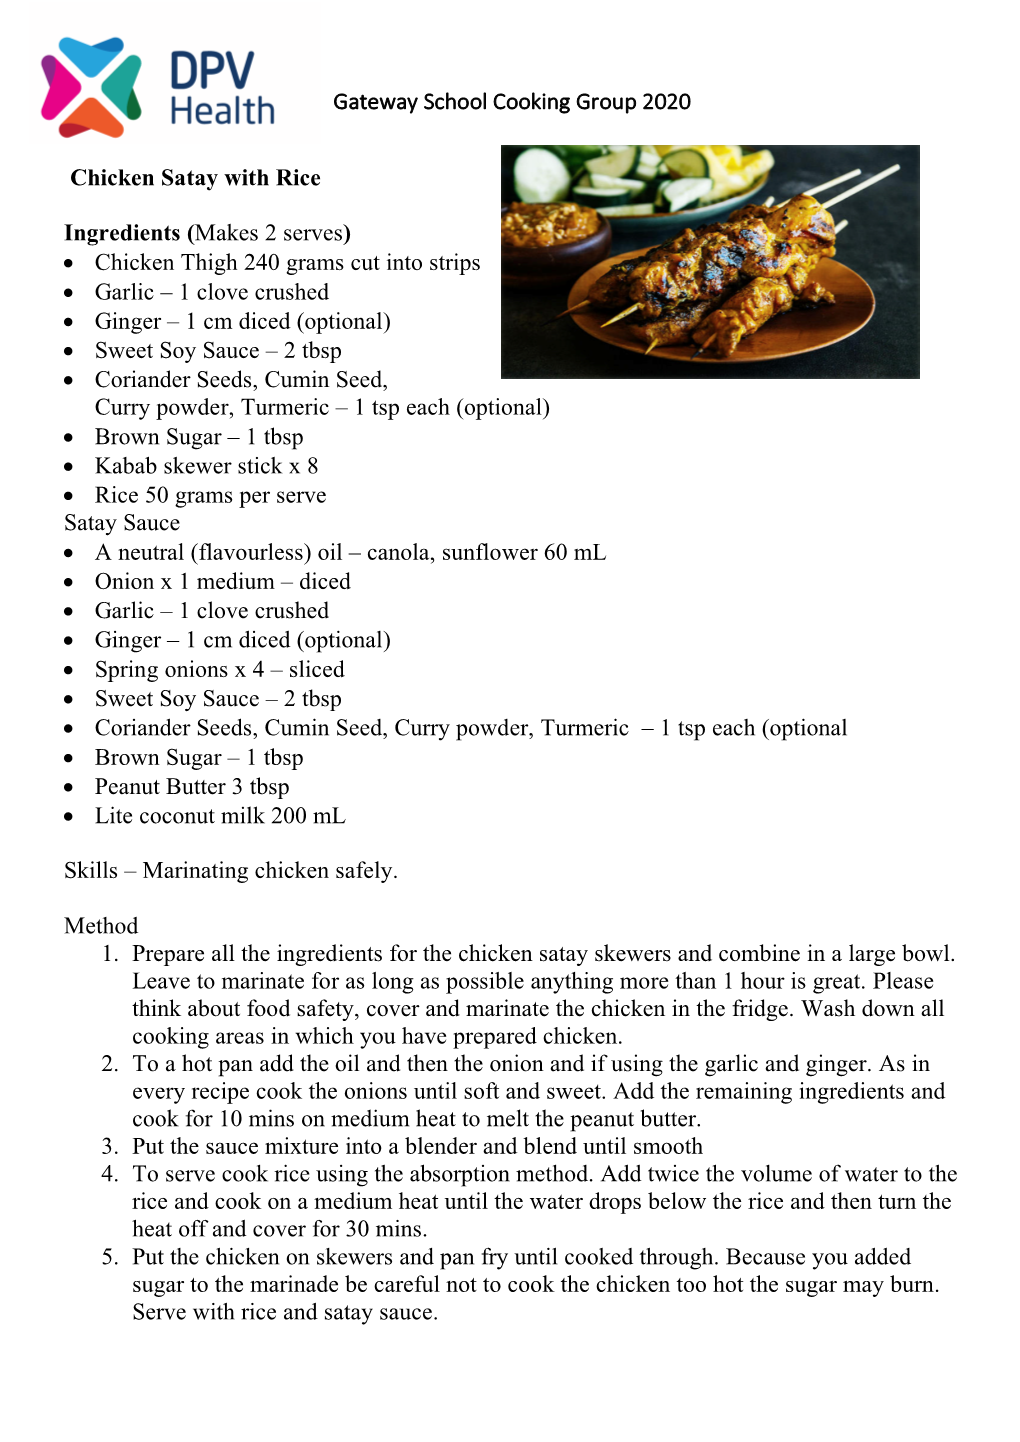 Gateway School Cooking Group 2020 Chicken Satay with Rice Ingredients